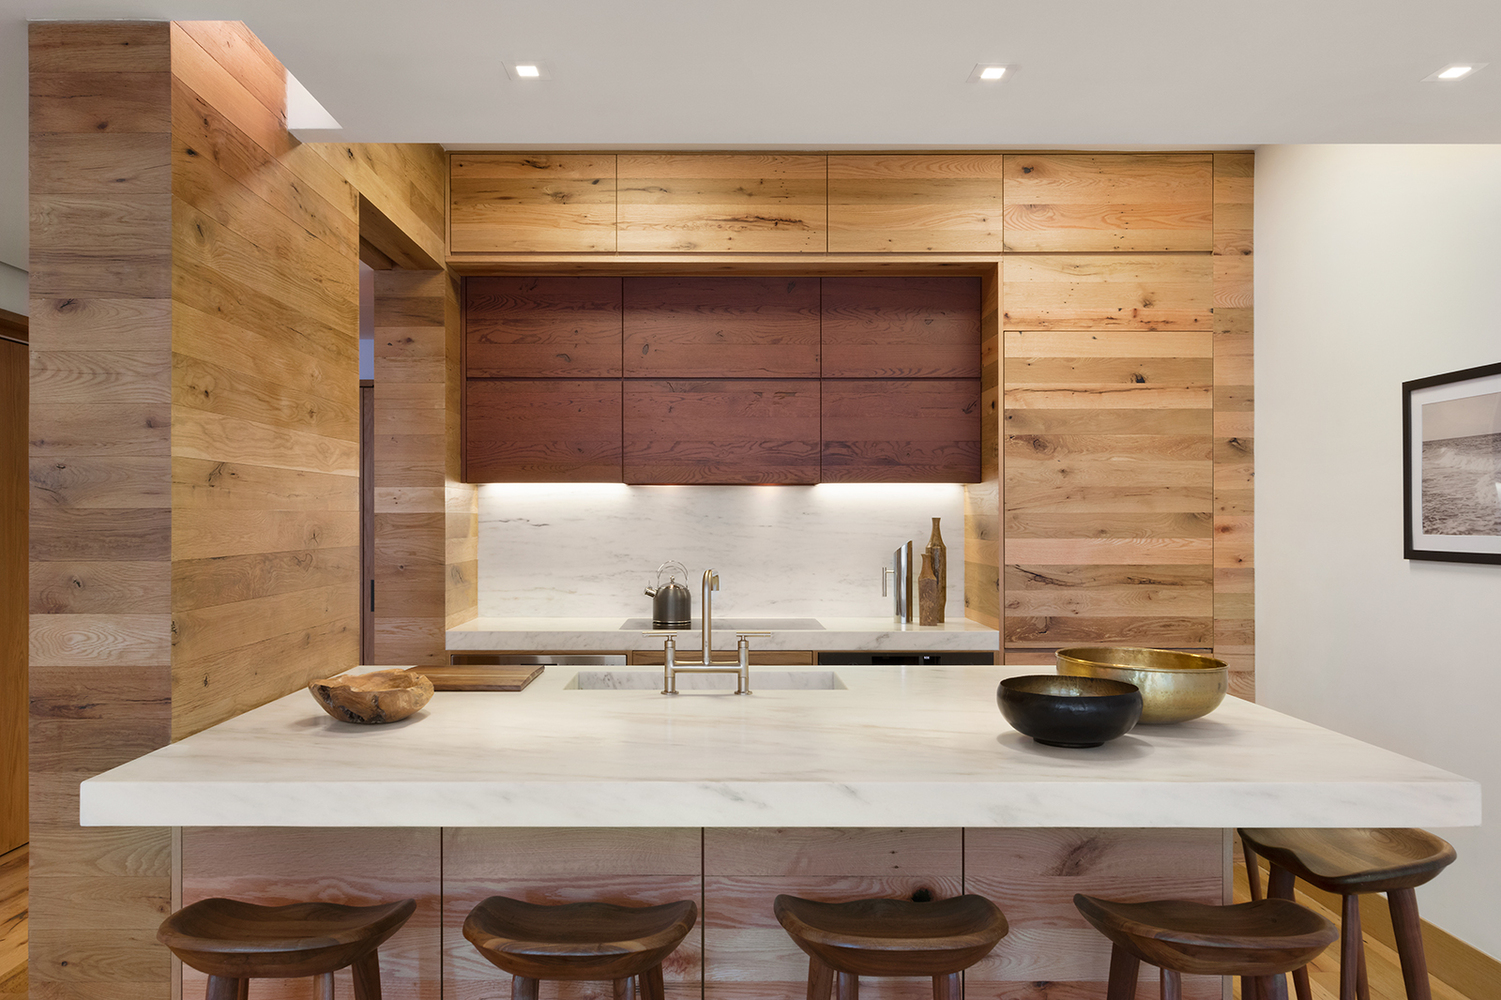 Wood paneled storage spaces in a rustic kitchen with marble counters and a teapot on the stove. MEP designed by 2L Engineering.